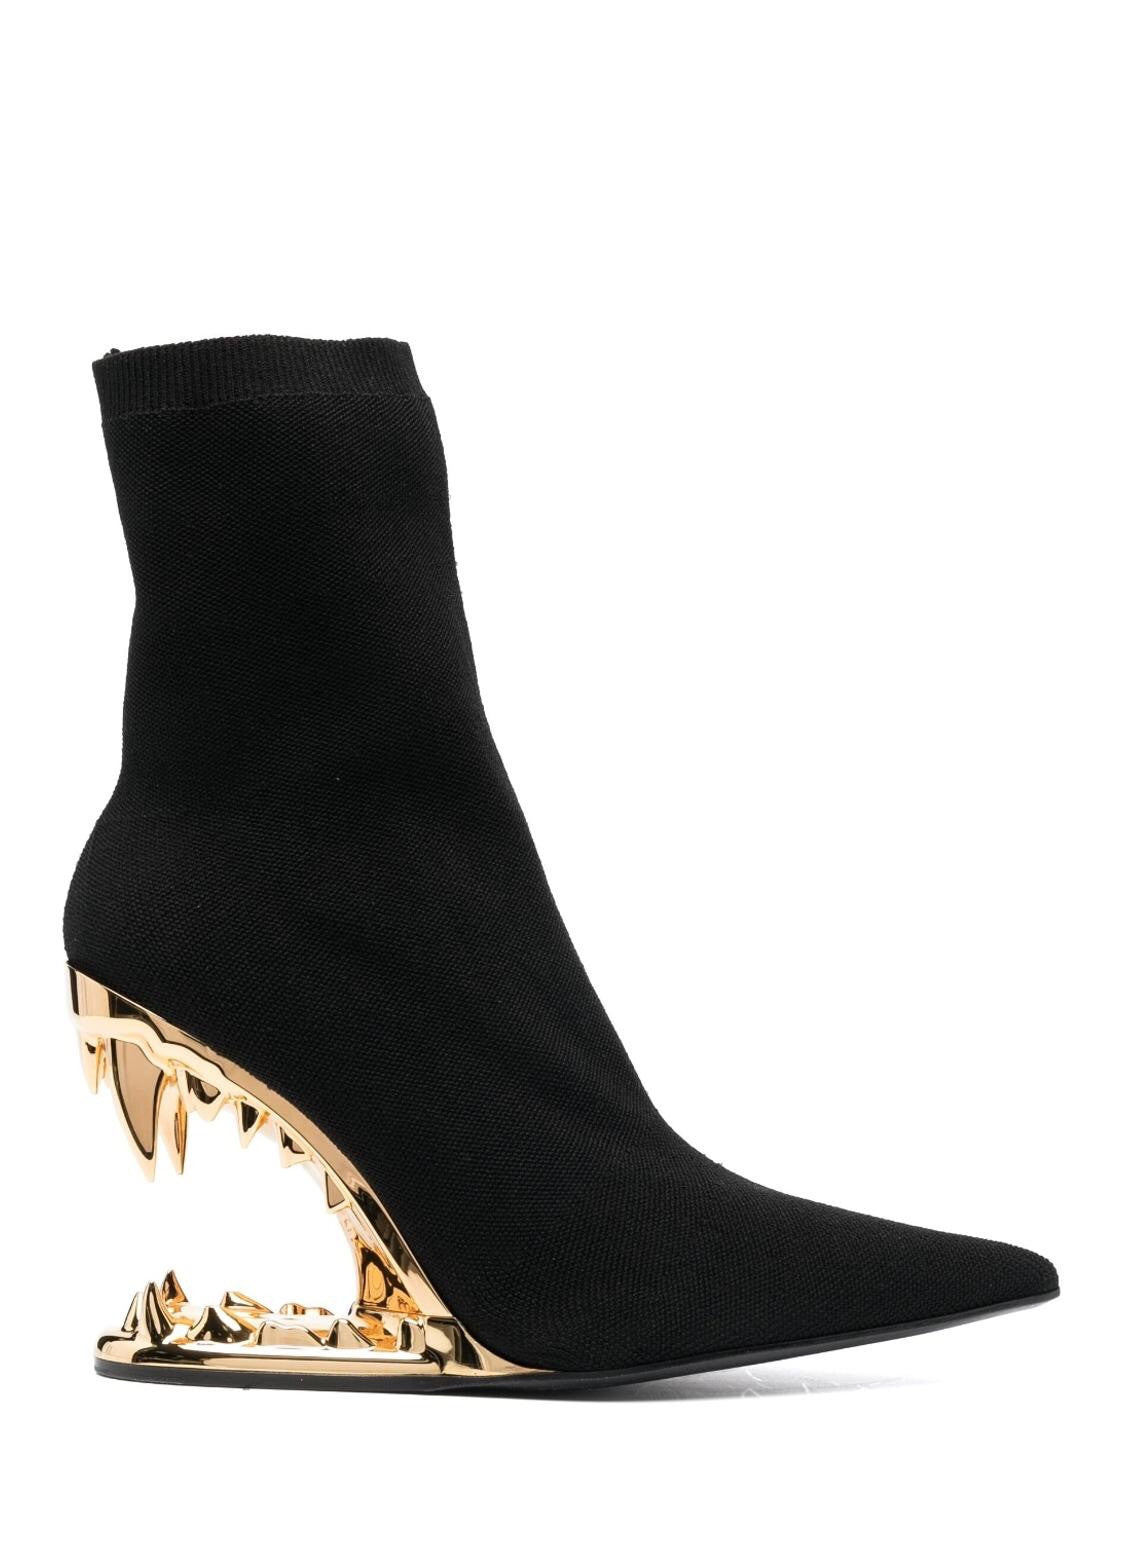 Toni Tiger Tooth Ankle Boots